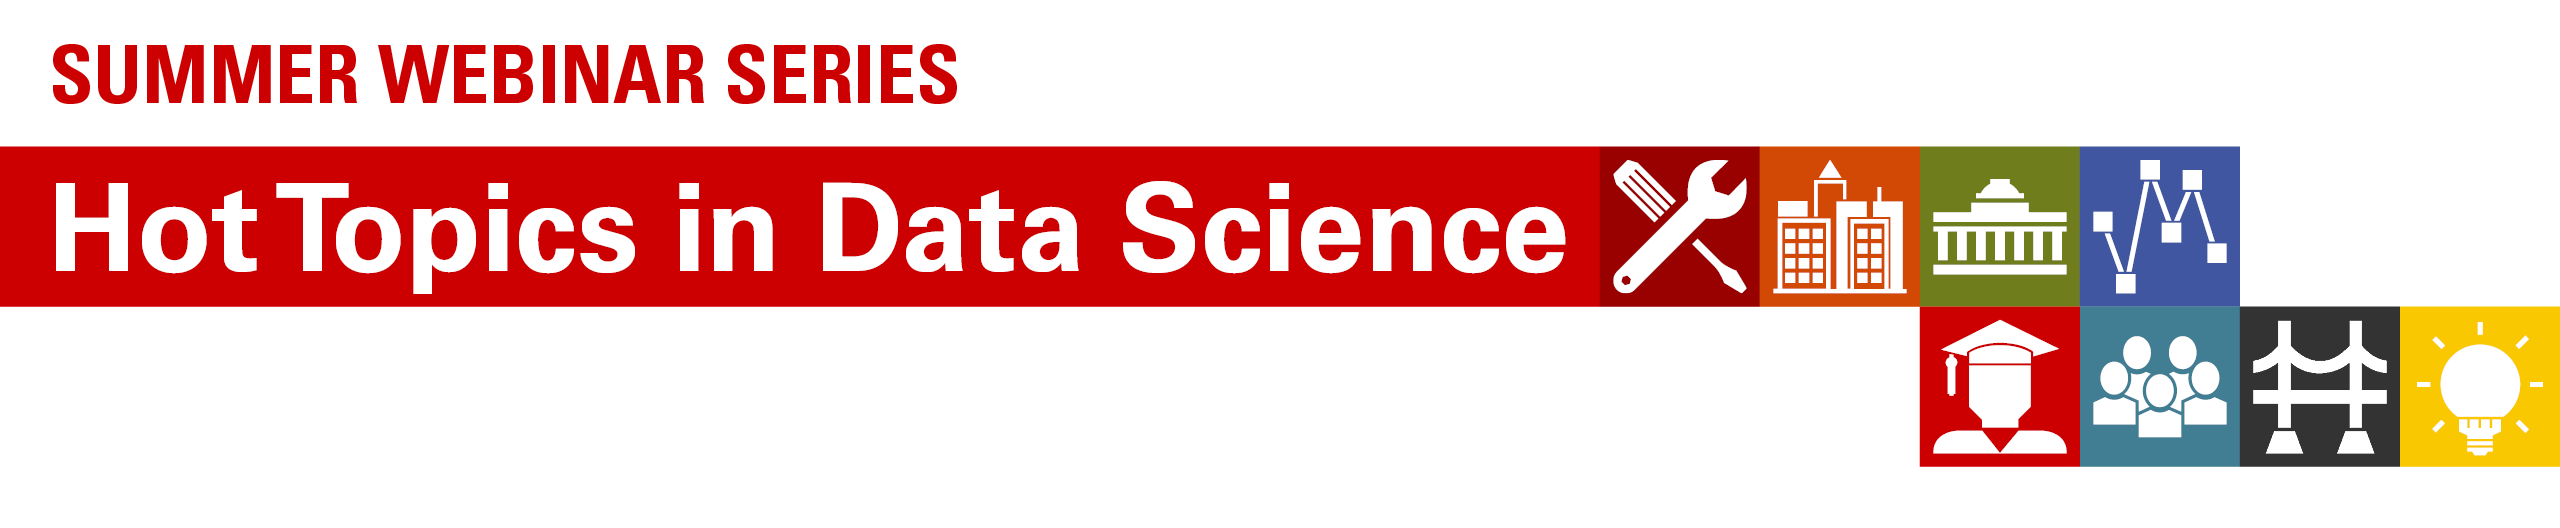 Banner for the Hot Topics in Data Science Summer Webinar Series, with color-coded icon squares representing the series sessions.